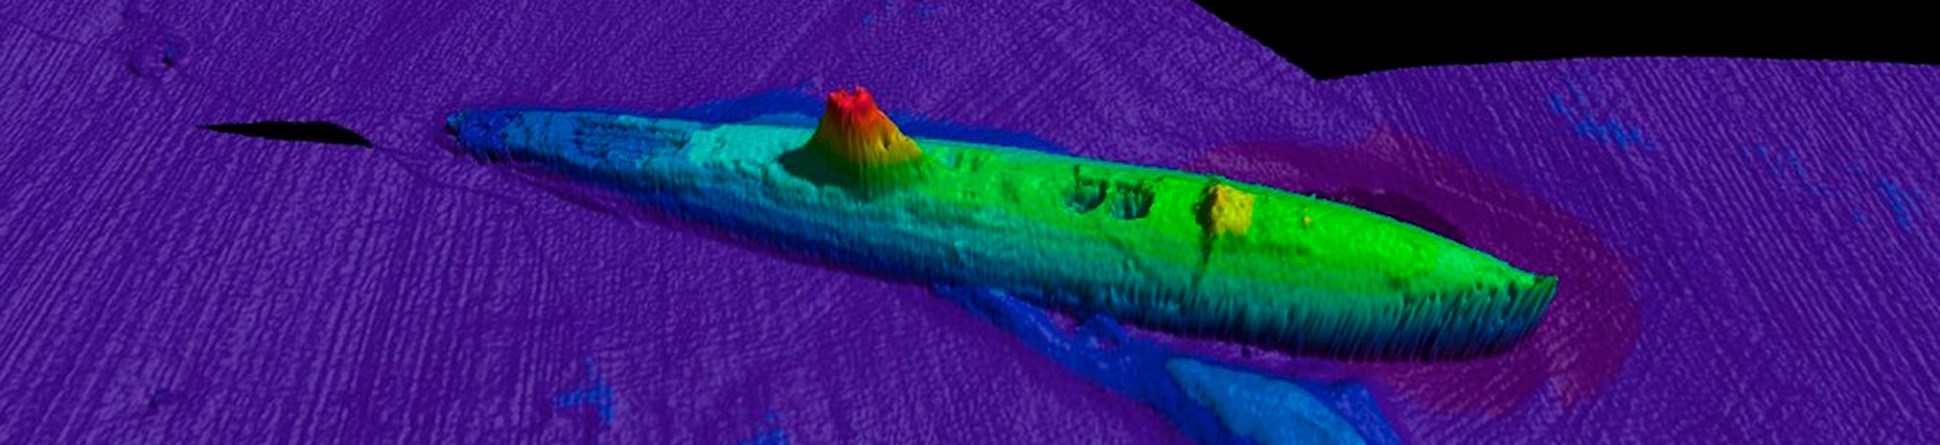 Computer image of submarine wreck from sonar survey